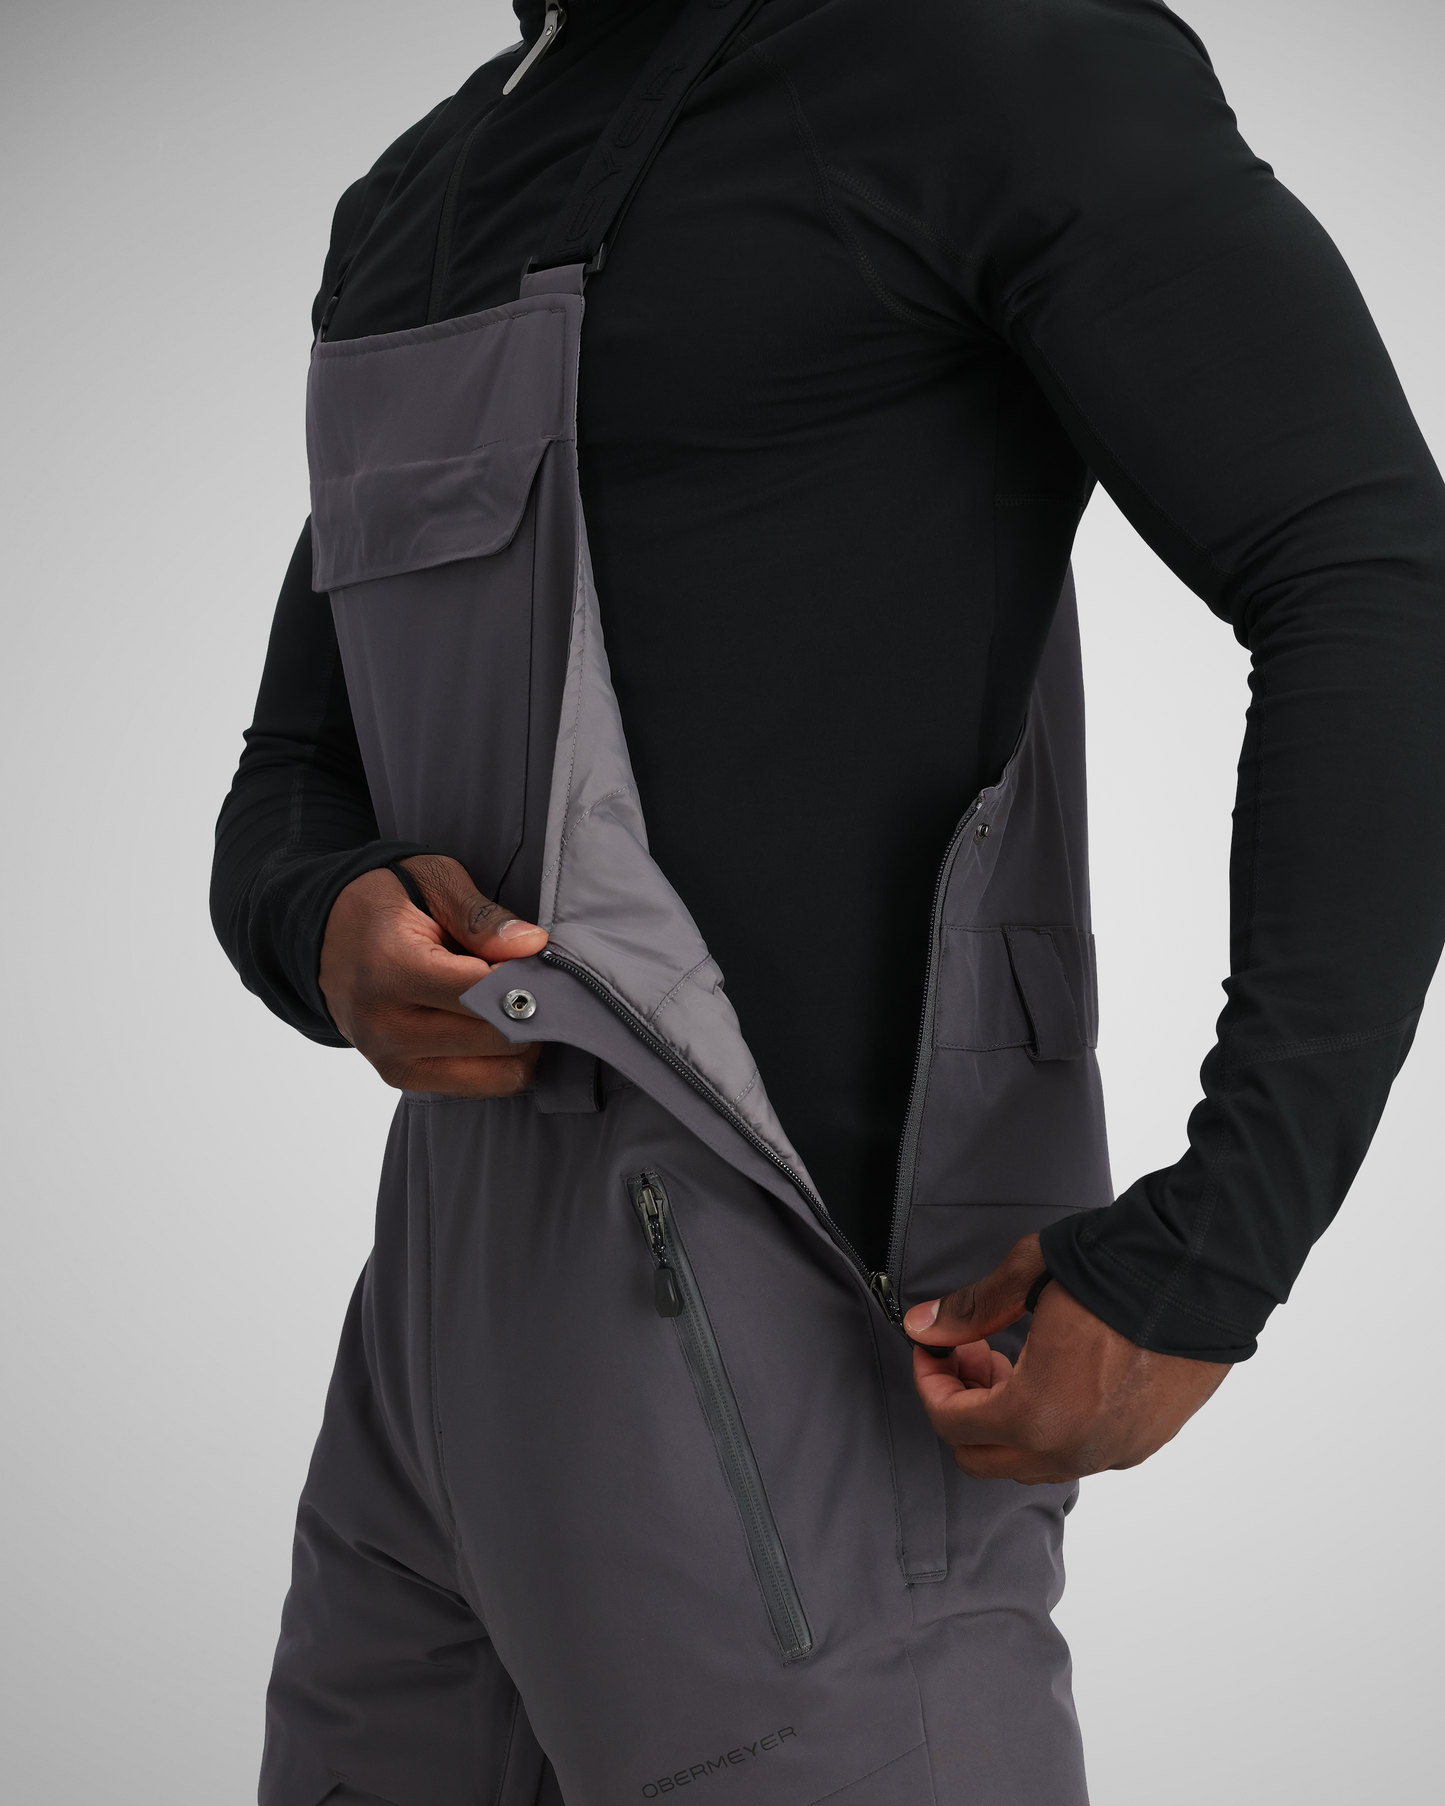 Side opening with snap closure | Getting in and out of these bibs is assisted with a side zipper opening with snap closure with best-in-class, secure snaps. 